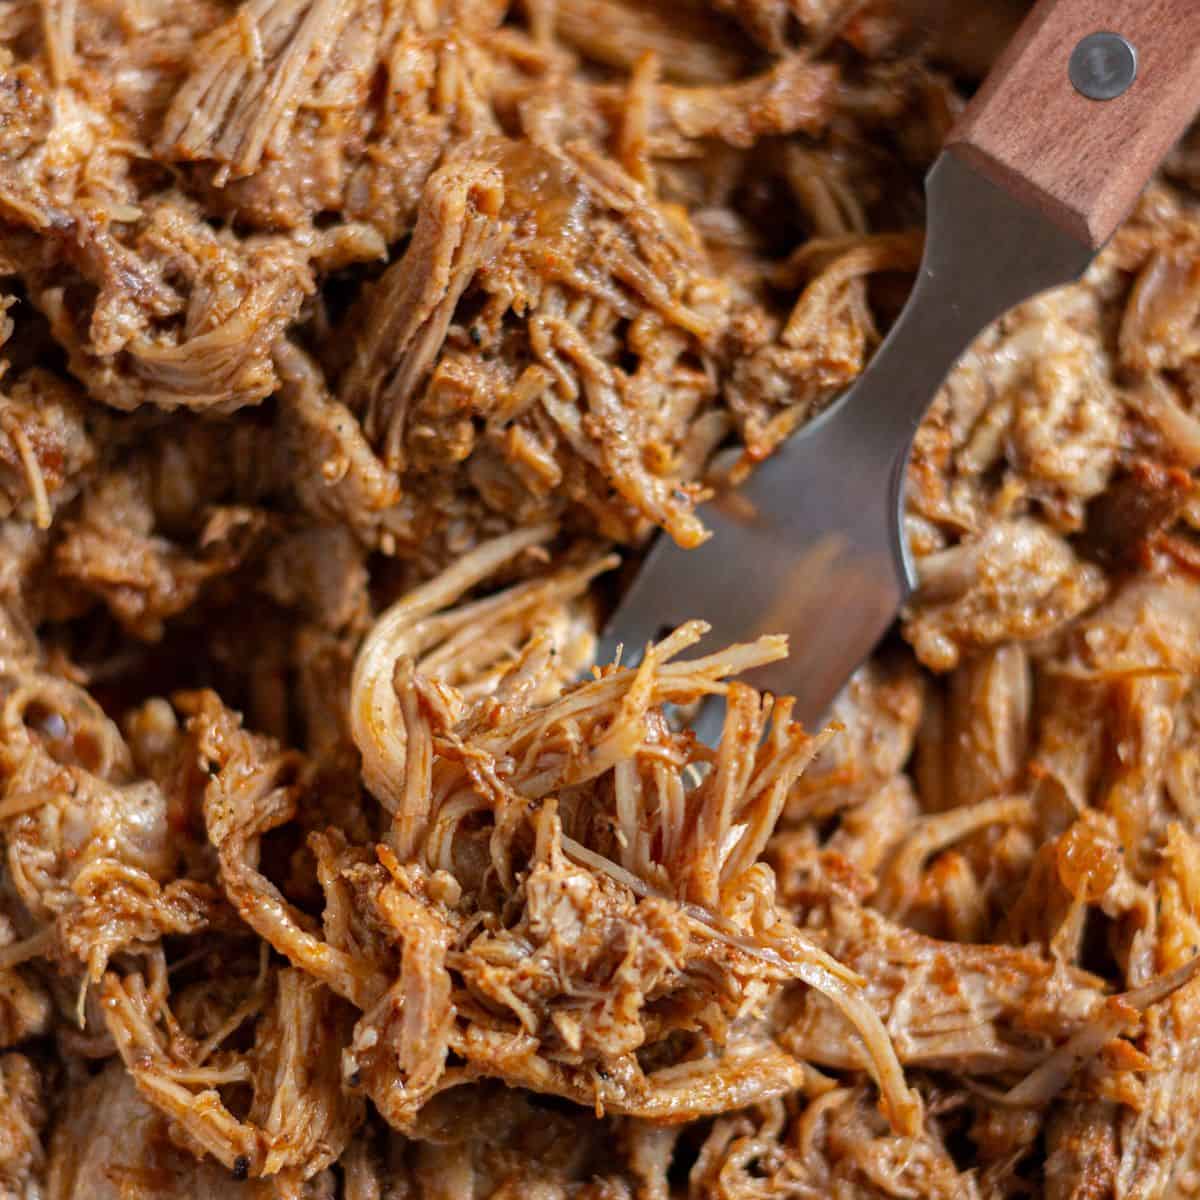 Zoomed in image of shredded pulled pork with a fork.